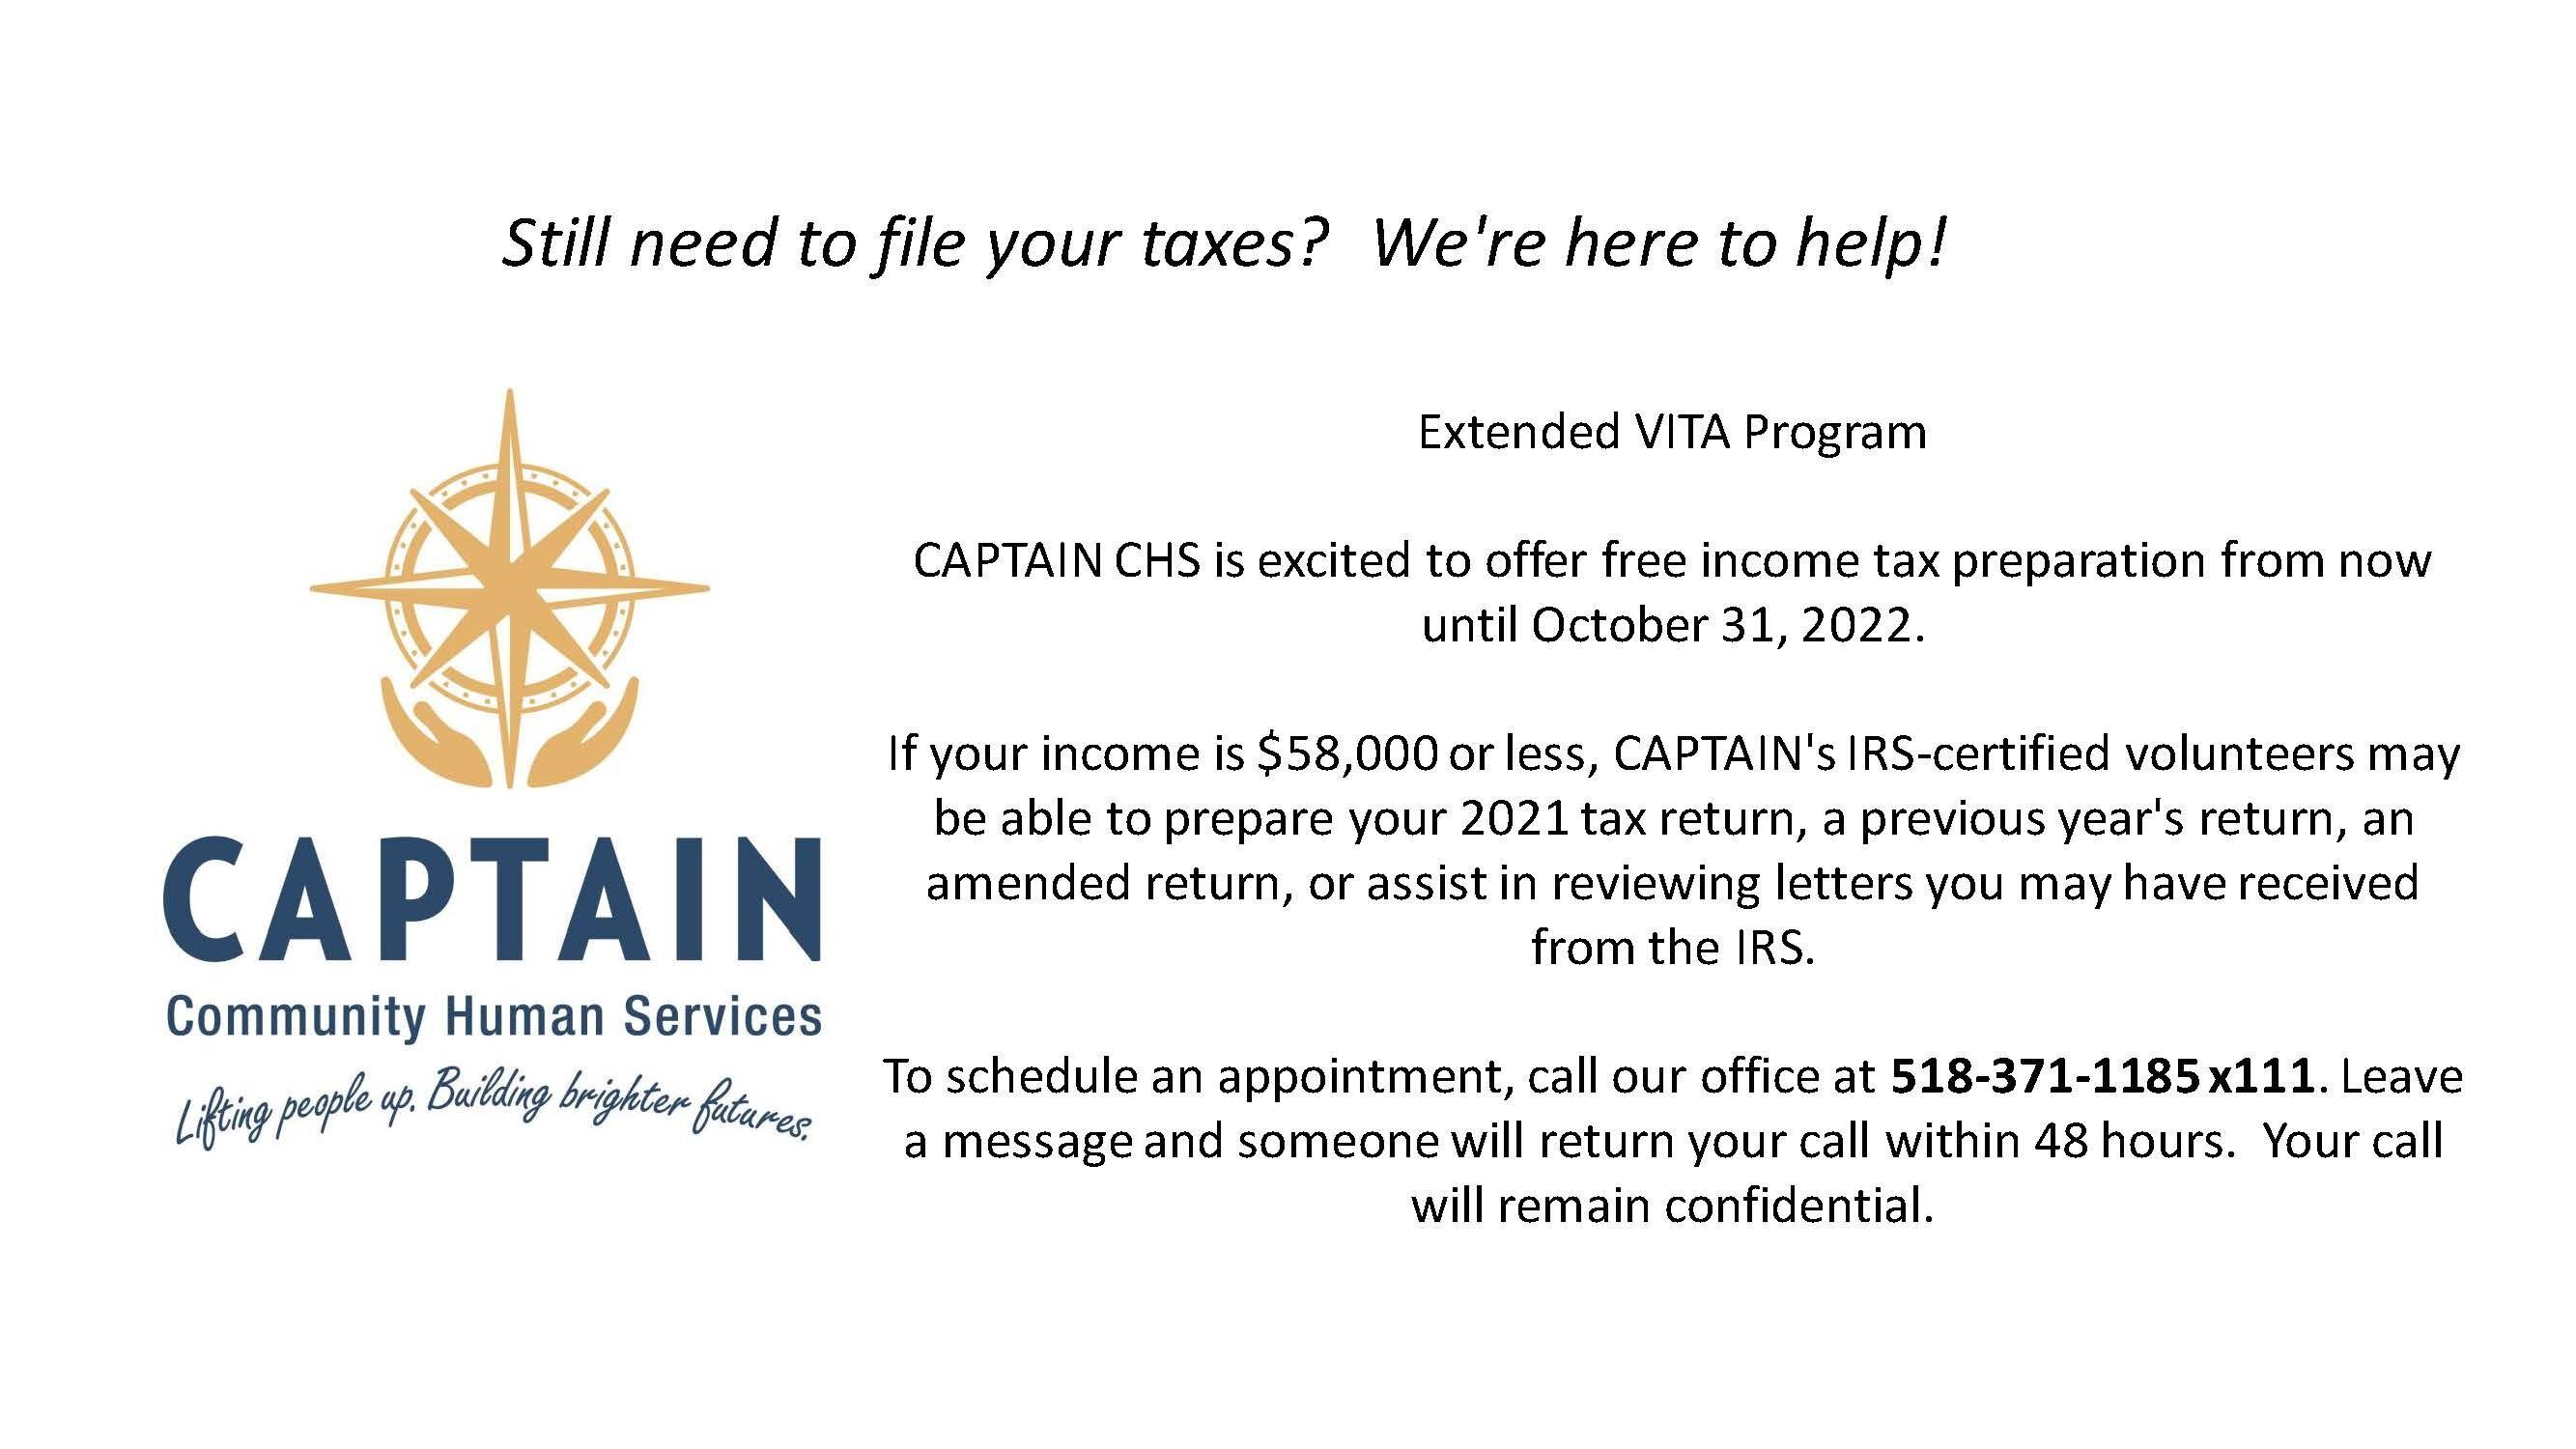 VITA Program Extended to Help Individuals and Families File Their Tax Returns!